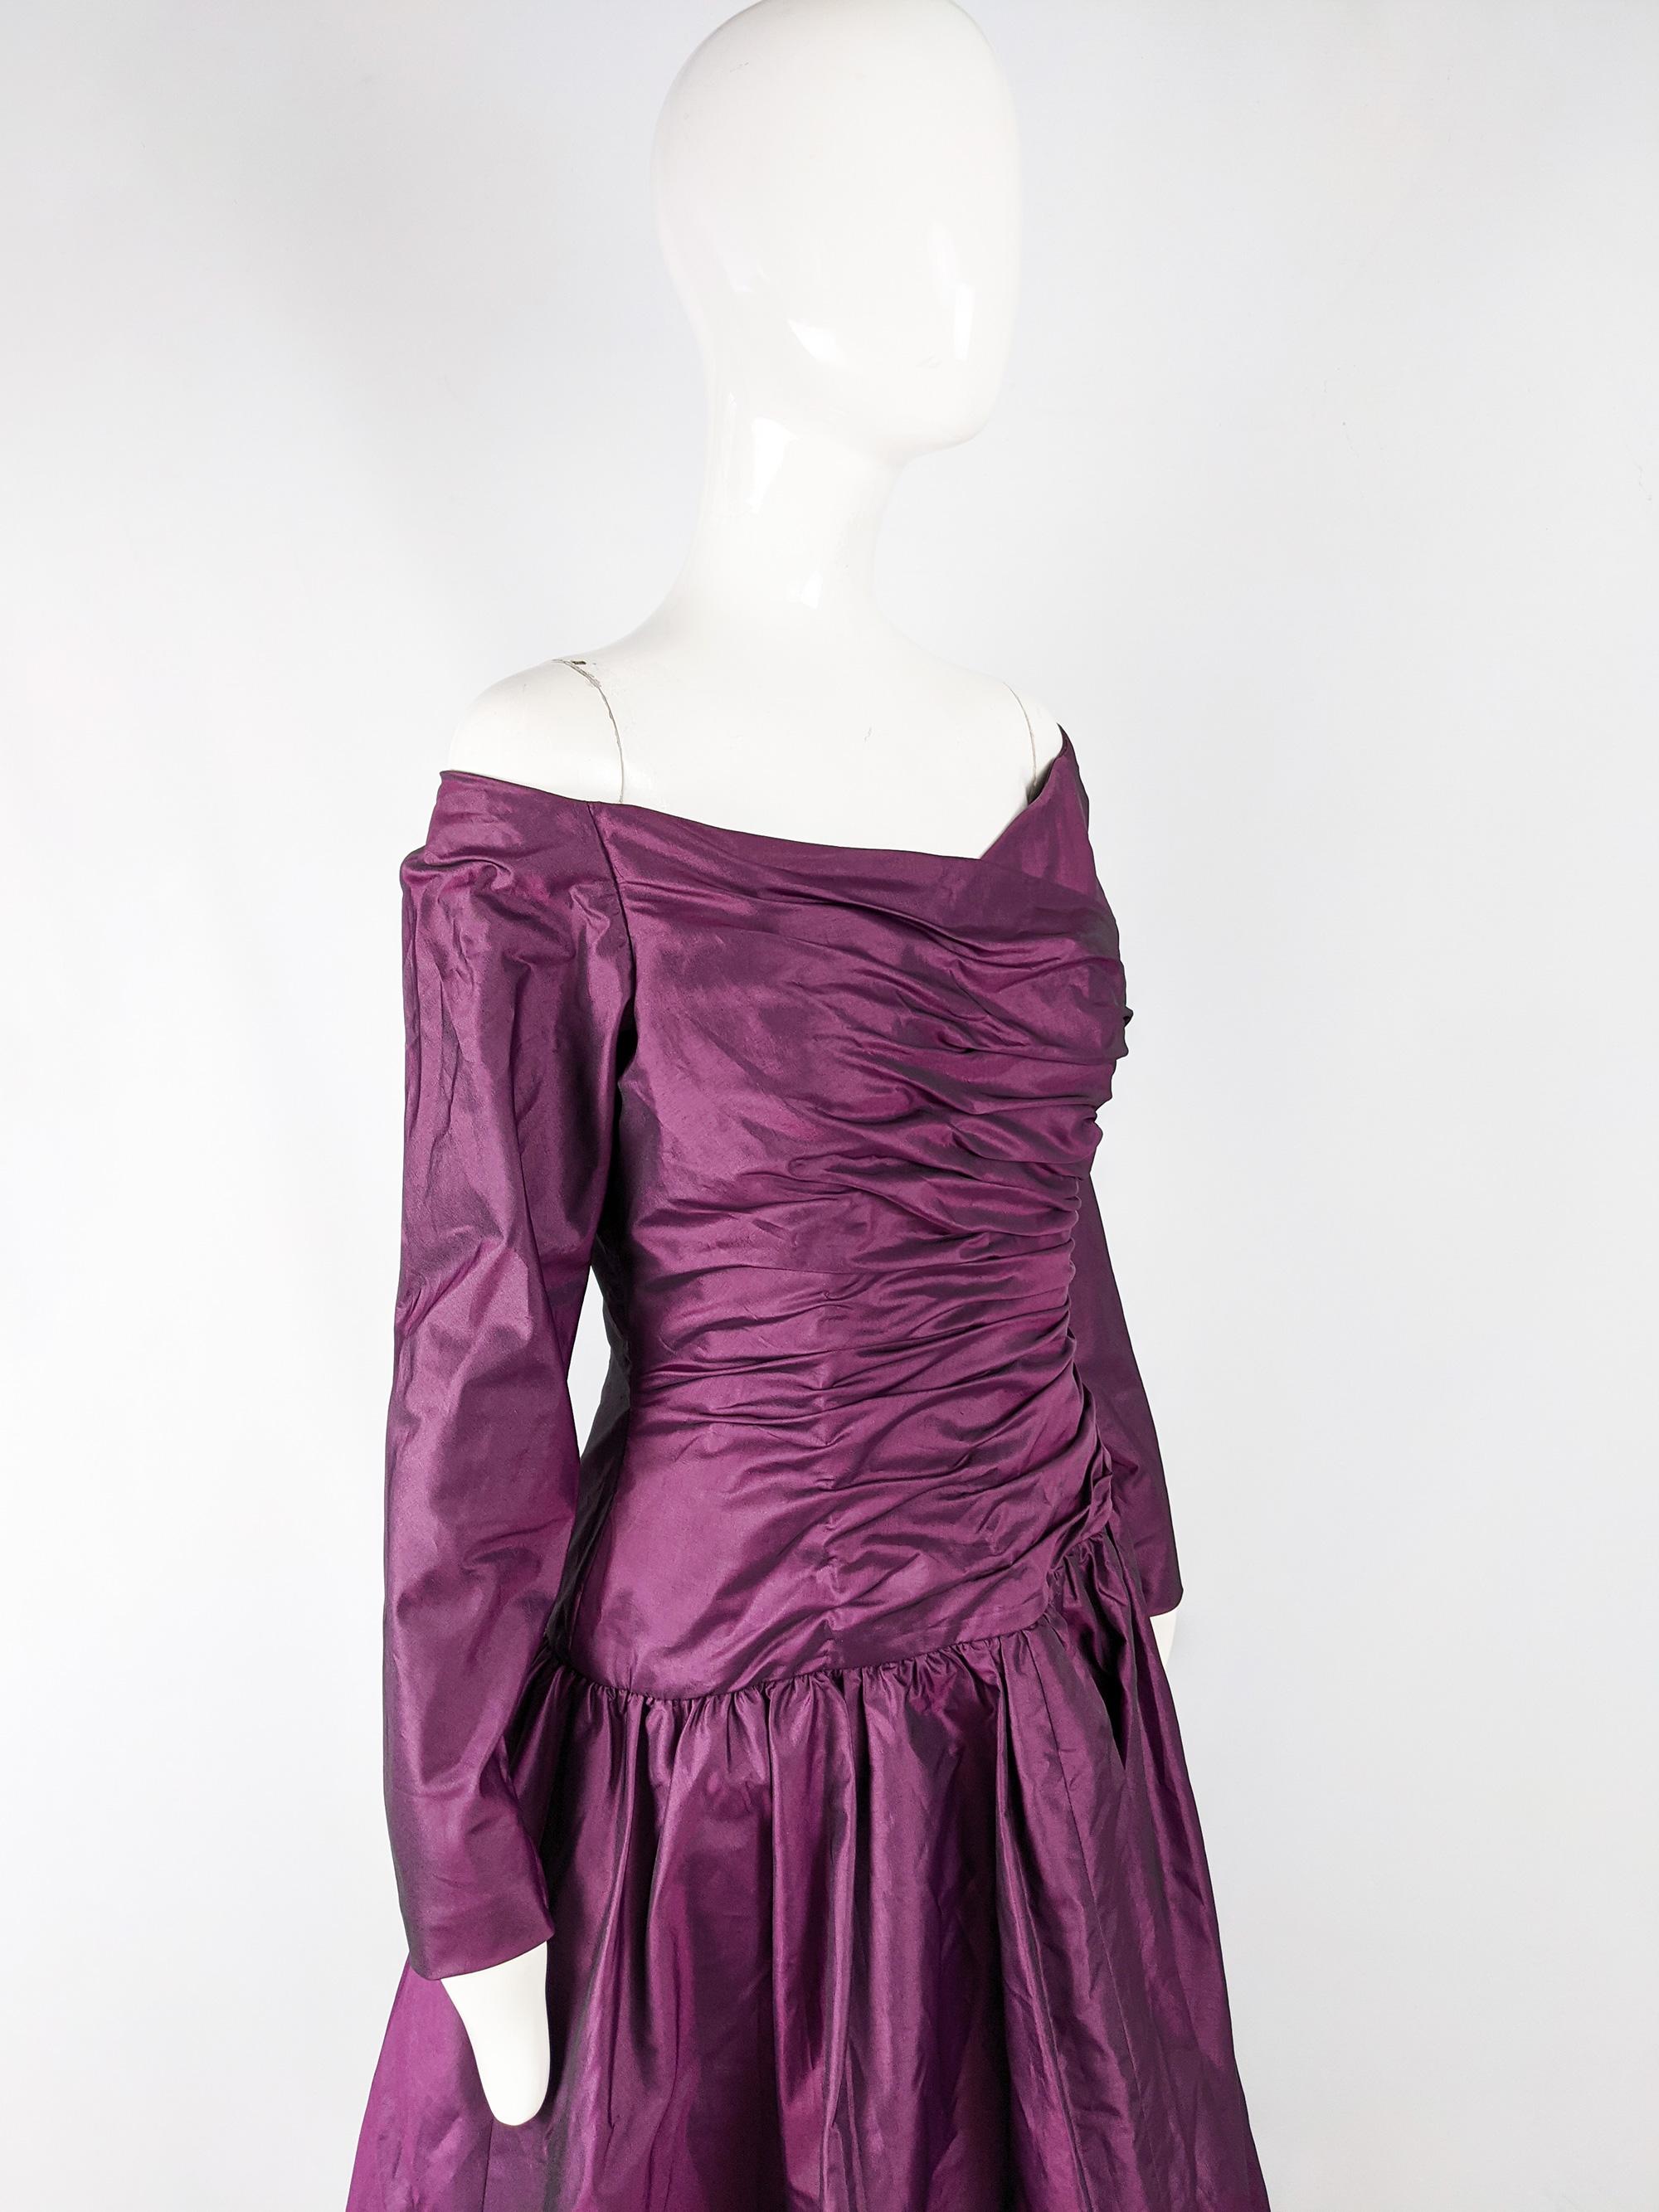 Murray Arbeid Vintage Purple Taffeta Formal Ball Evening Gown, 1980s In Good Condition For Sale In Doncaster, South Yorkshire